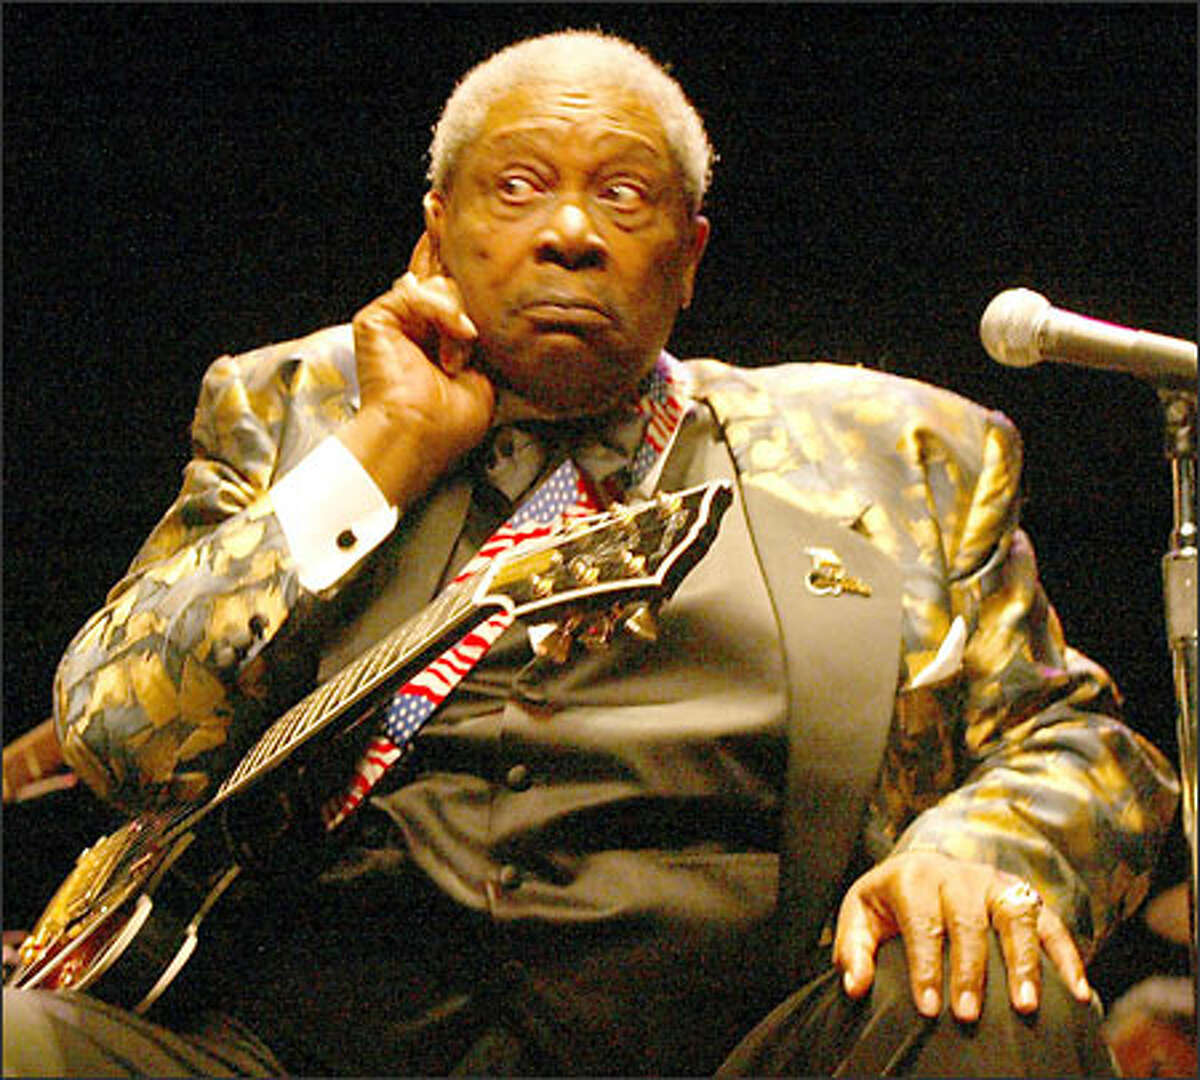 B.B. King, the Mississippi-bred blues legend, pretends he can't hear a lady who yells out "we Love You, B.B.!" from high up in McCaw Hall at Seattle Center.